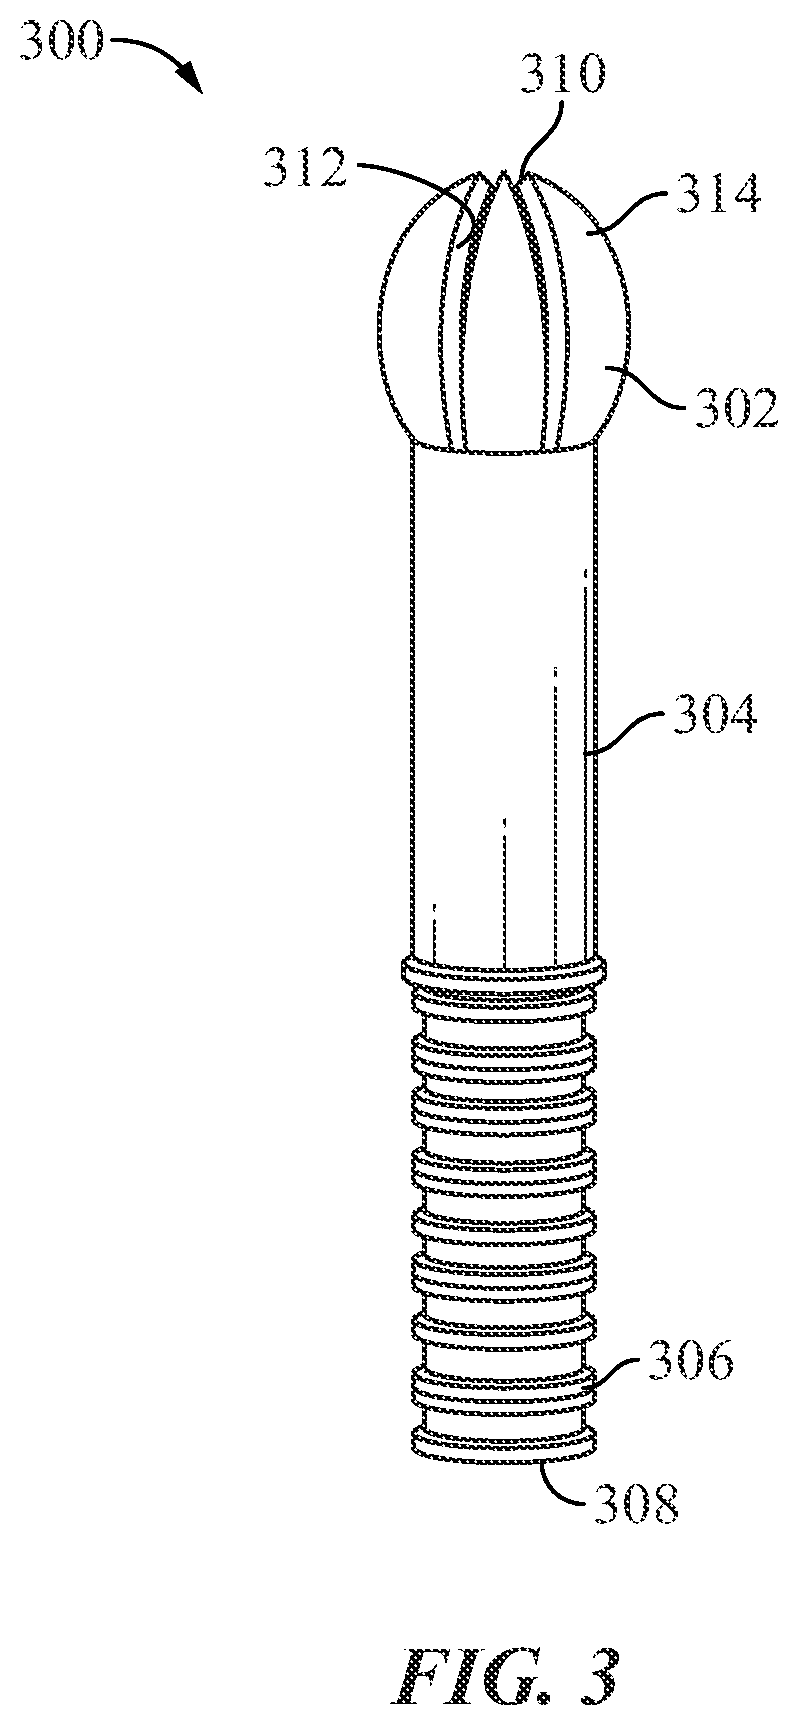 Round tip vaginal insert system and method of using the same